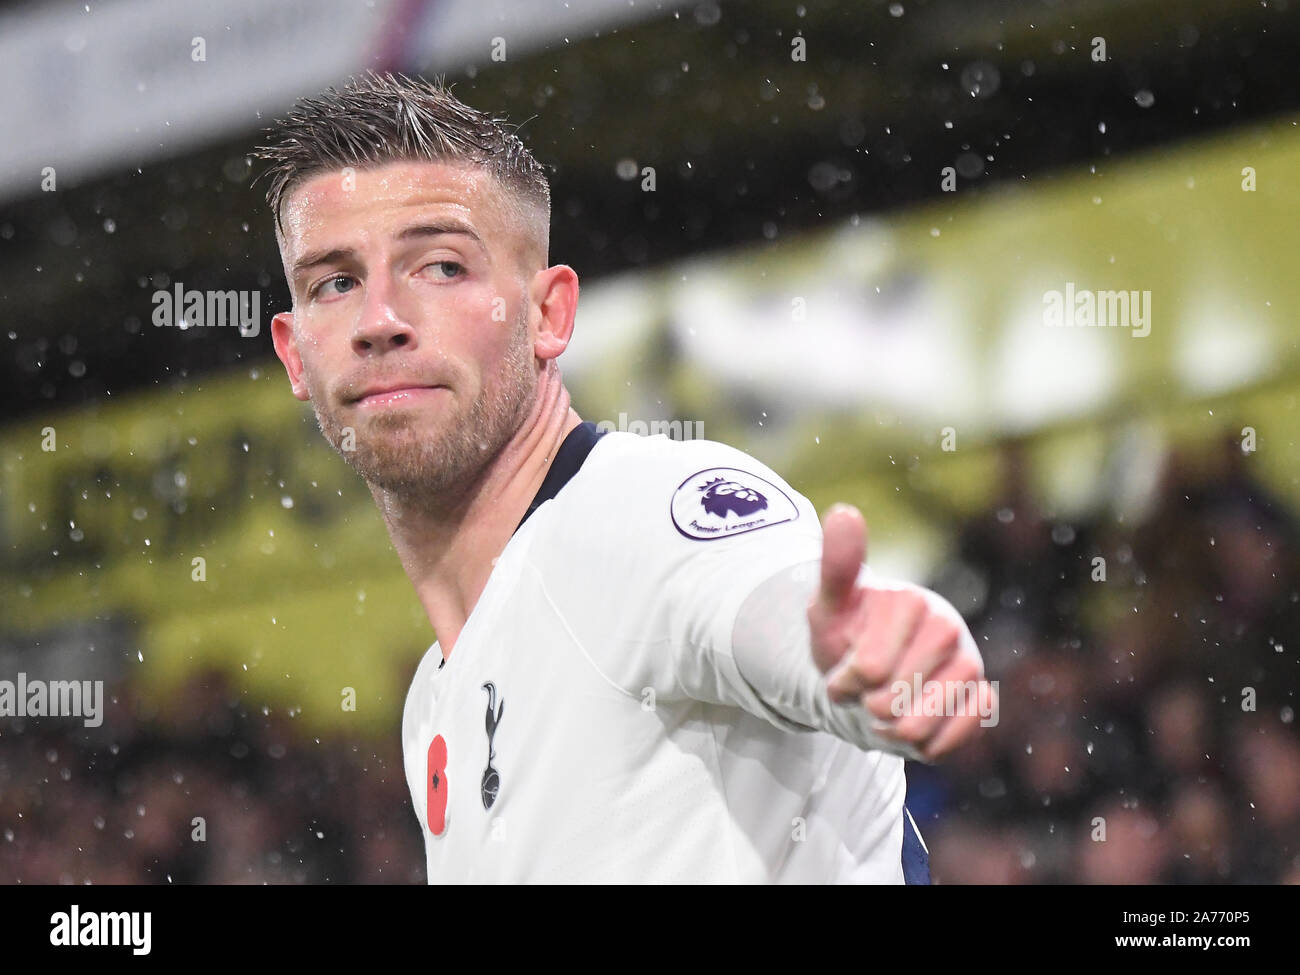 LONDON, ENGLAND - NOVEMBER 10, 2018: Toby Alderweireld of Tottenham pictured during the 2018/19 Premier League game between Crystal Palace and Tottenham Hotspur at Selhurst Park. Stock Photo